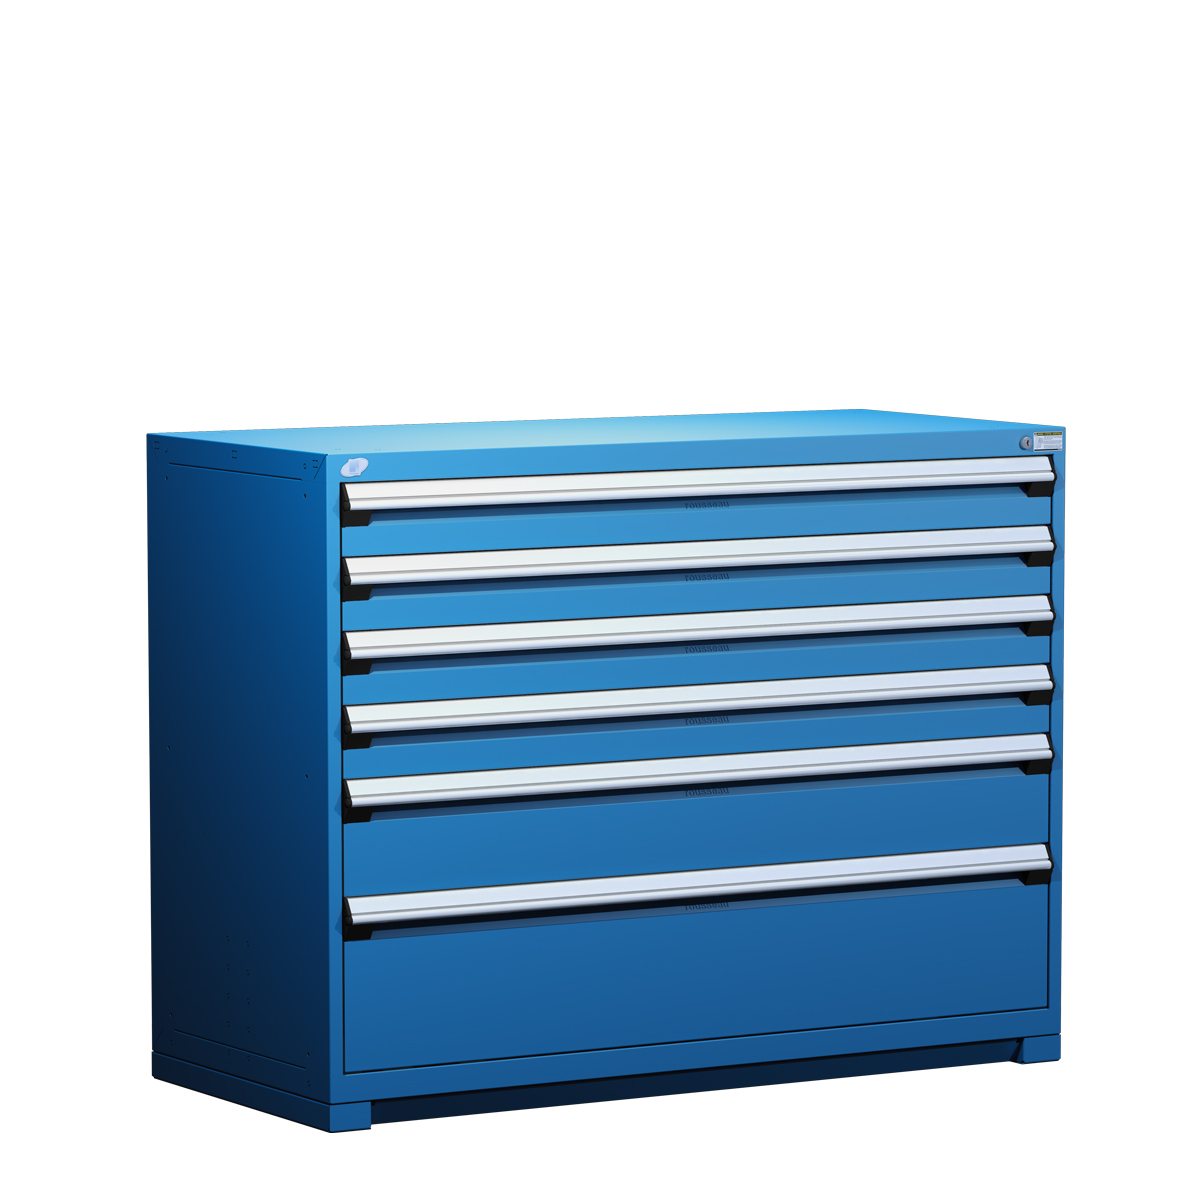 Heavy-Duty Stationary Cabinet (with Compartments) | Buy Online Material ...